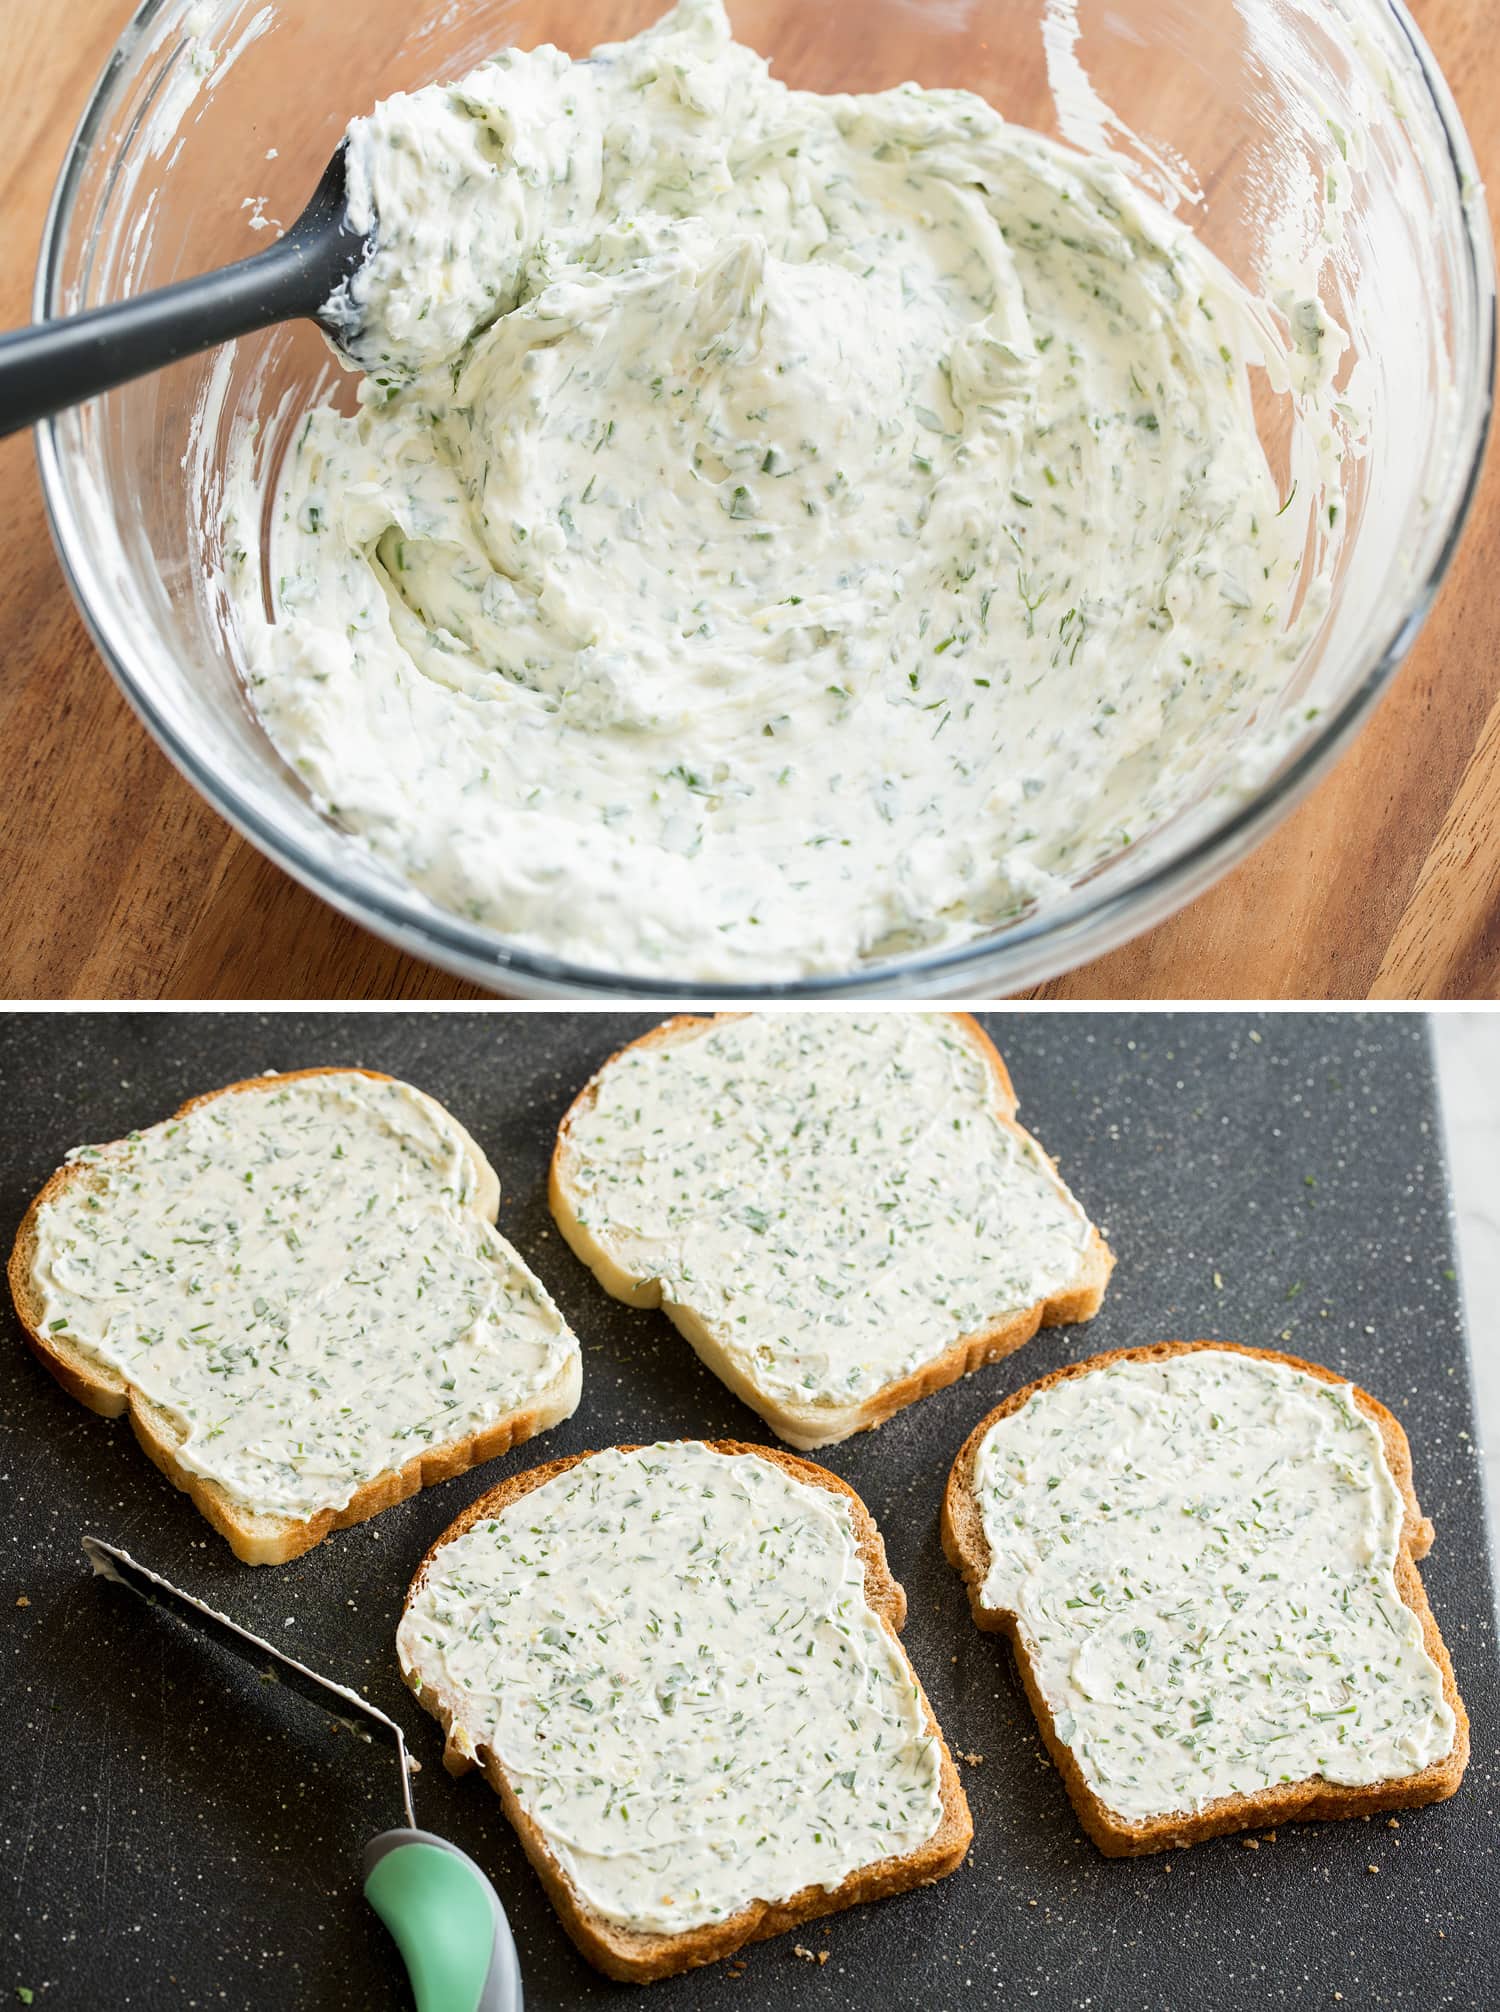 Spreading cream cheese filling on sandwiches.